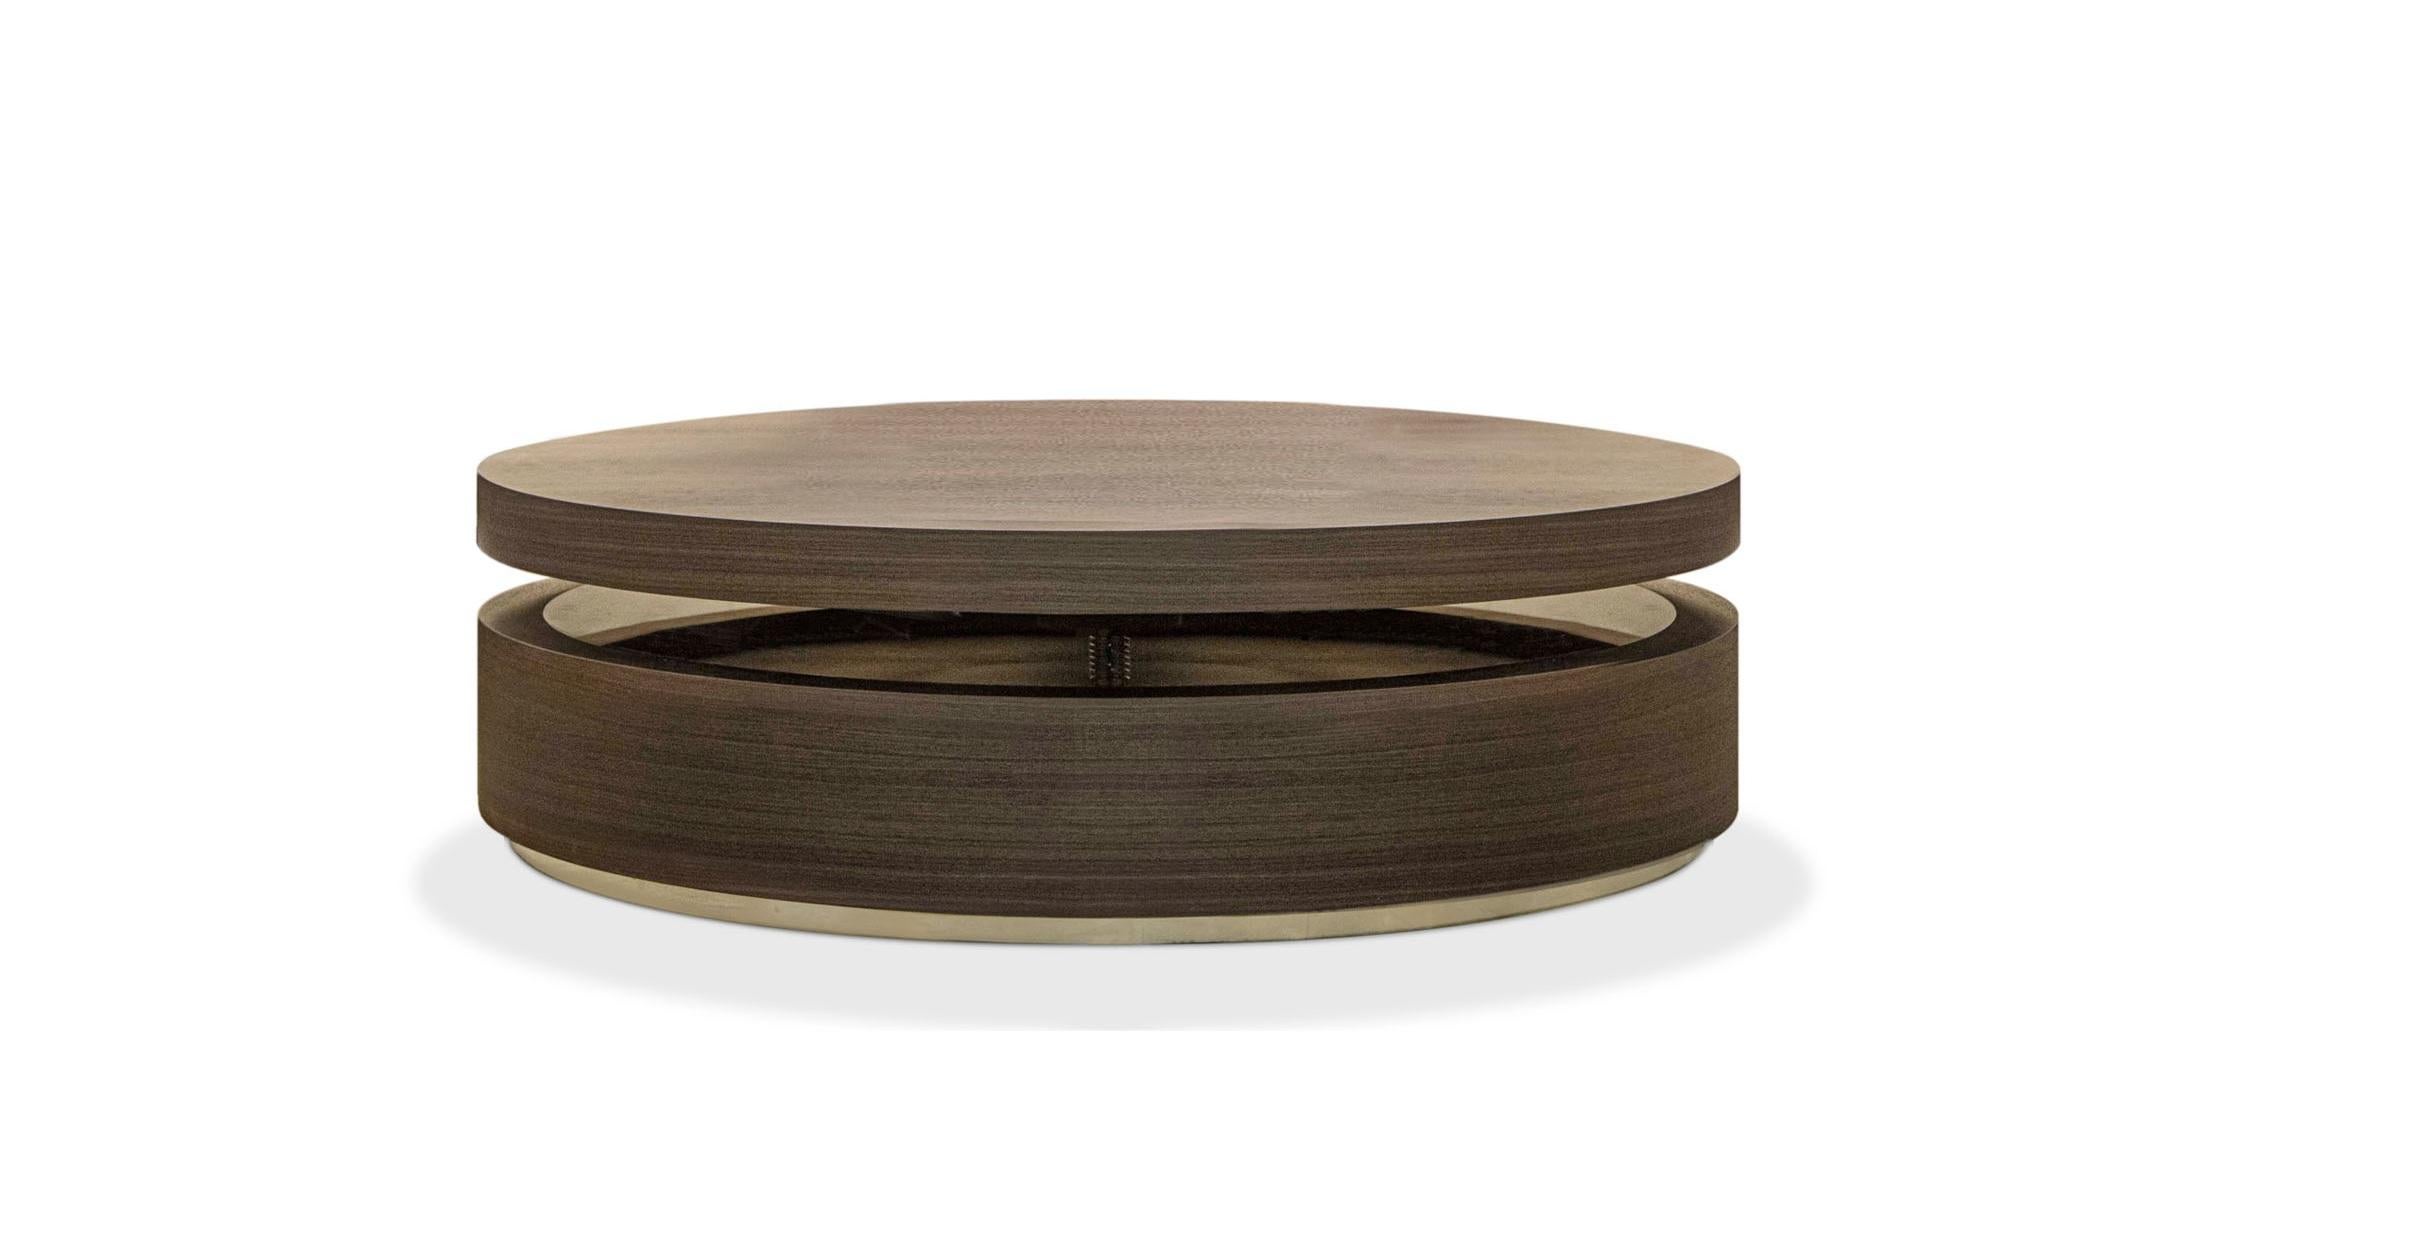 Matt walnut Ego coffee table by LK Edition
Dimensions: 110 x 26 x H 38 cm 
Materials: Matt finish walnut. 
Also available in walnut with polished brass.

It is with the sense of detail and requirement, this research of the exception by the